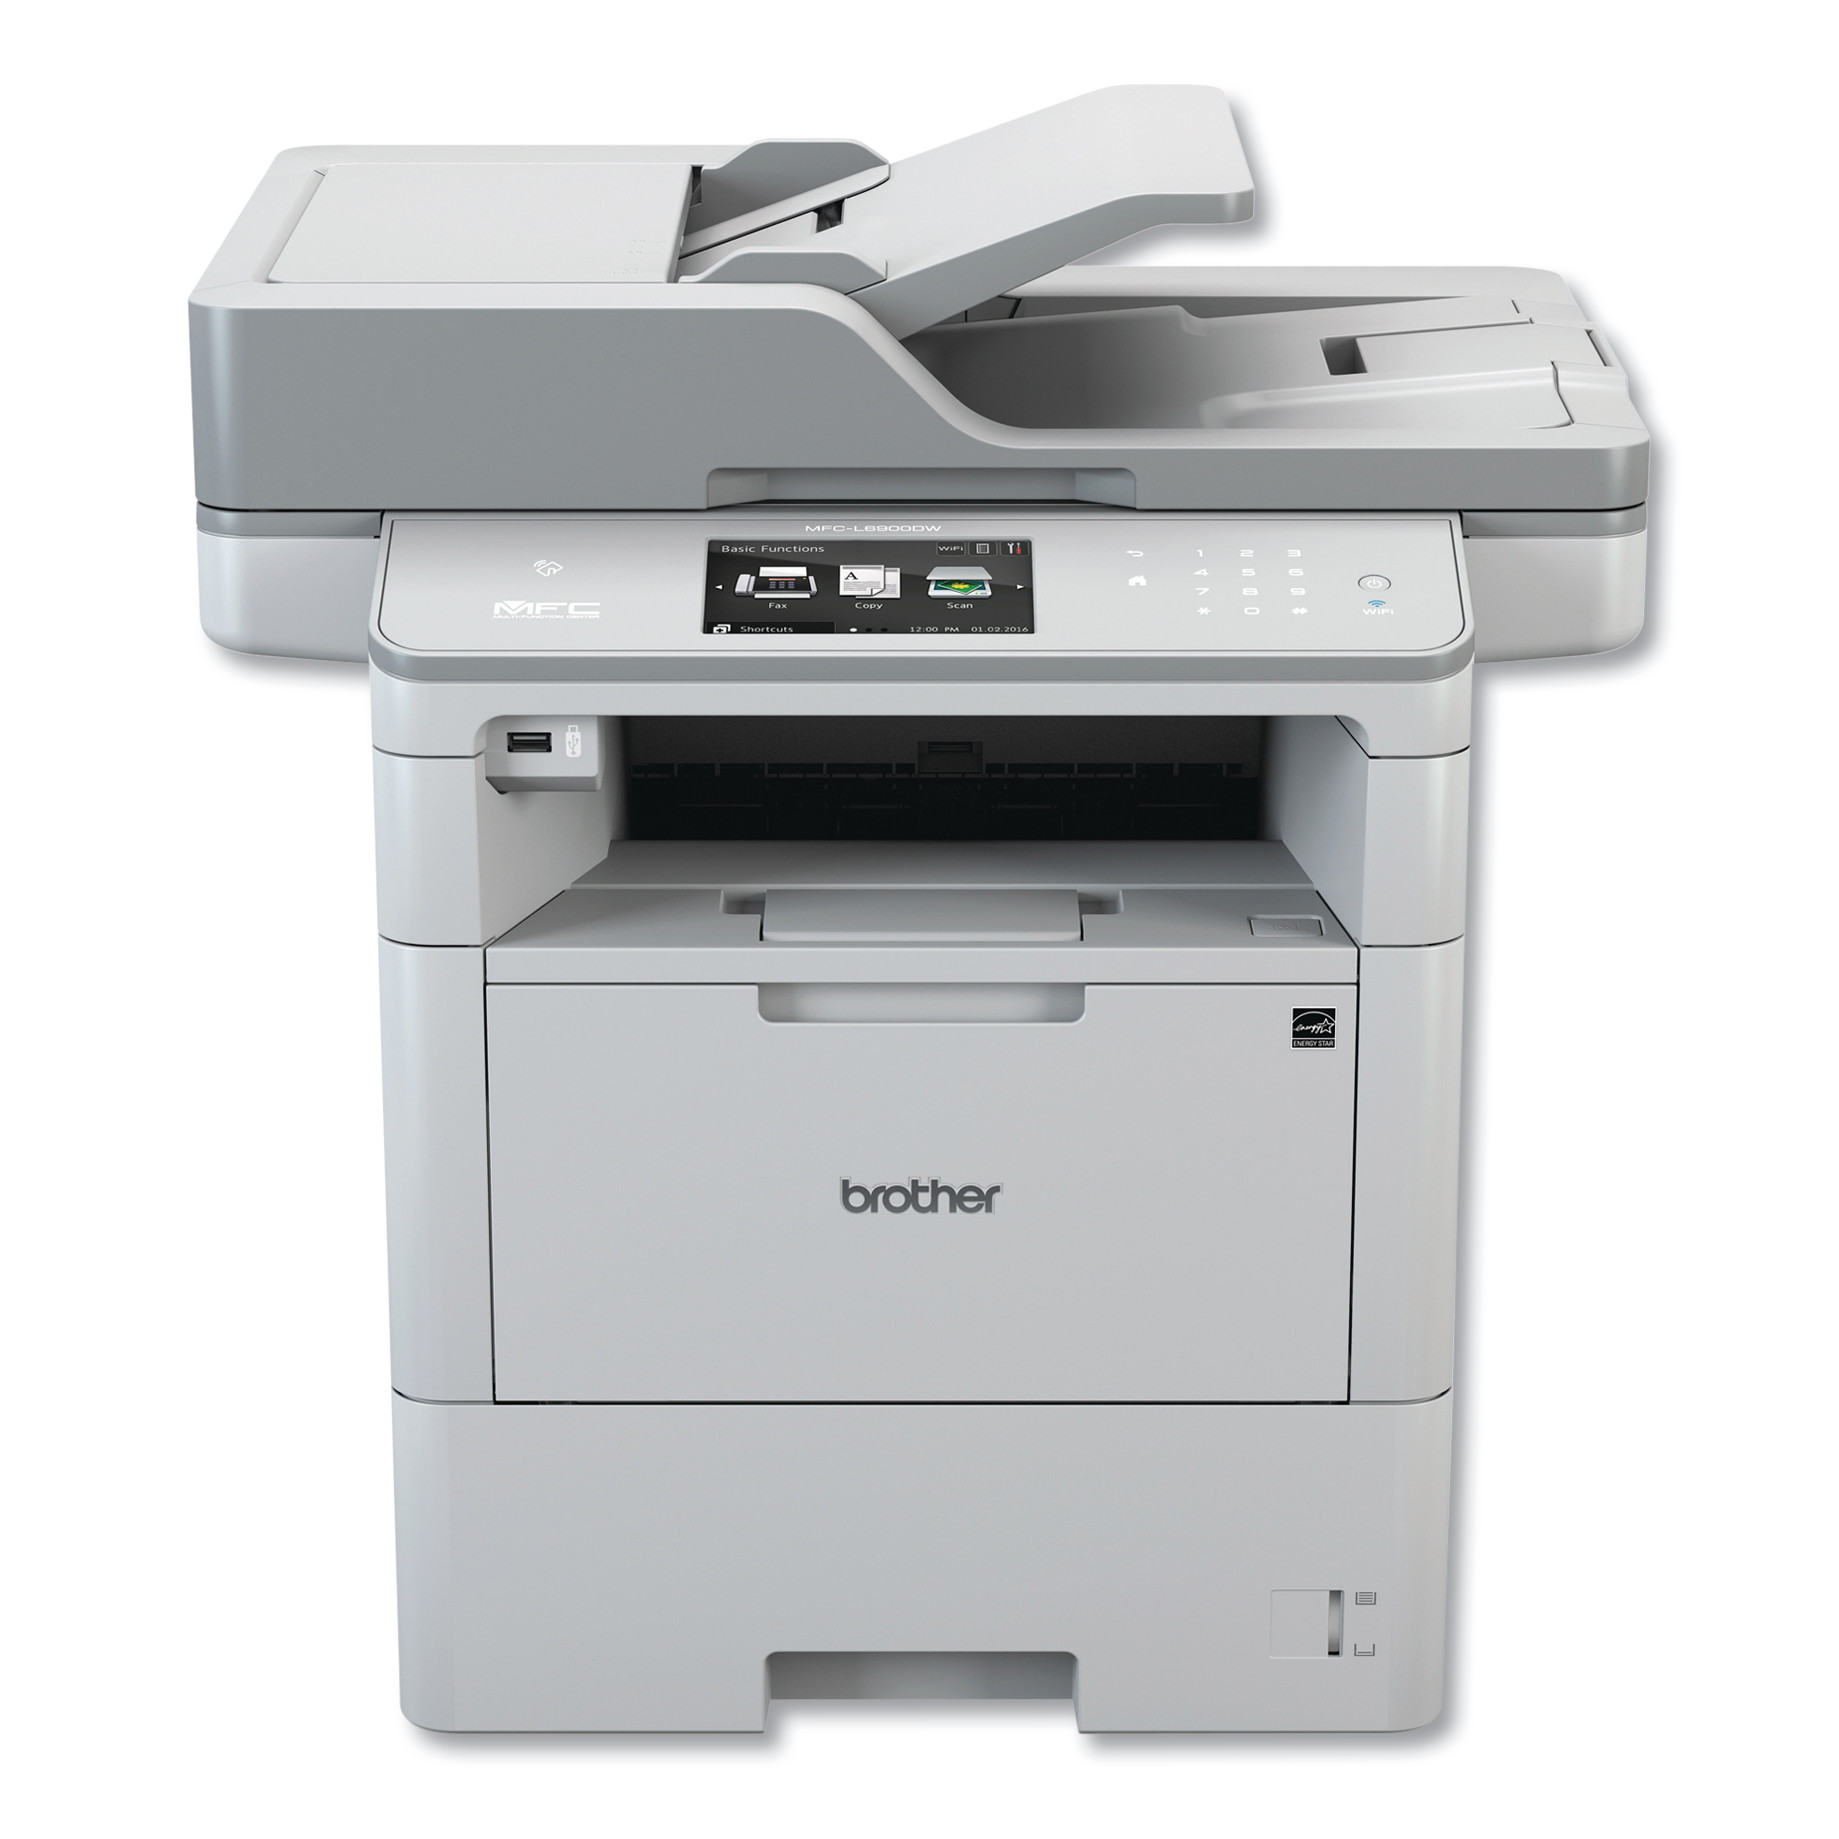  Brother MFCL6900DWG MFCL6900DW Business Laser All-in-One Printer for Mid-Size Workgroups with Higher Print Volumes (BRTMFCL6900DWG) 